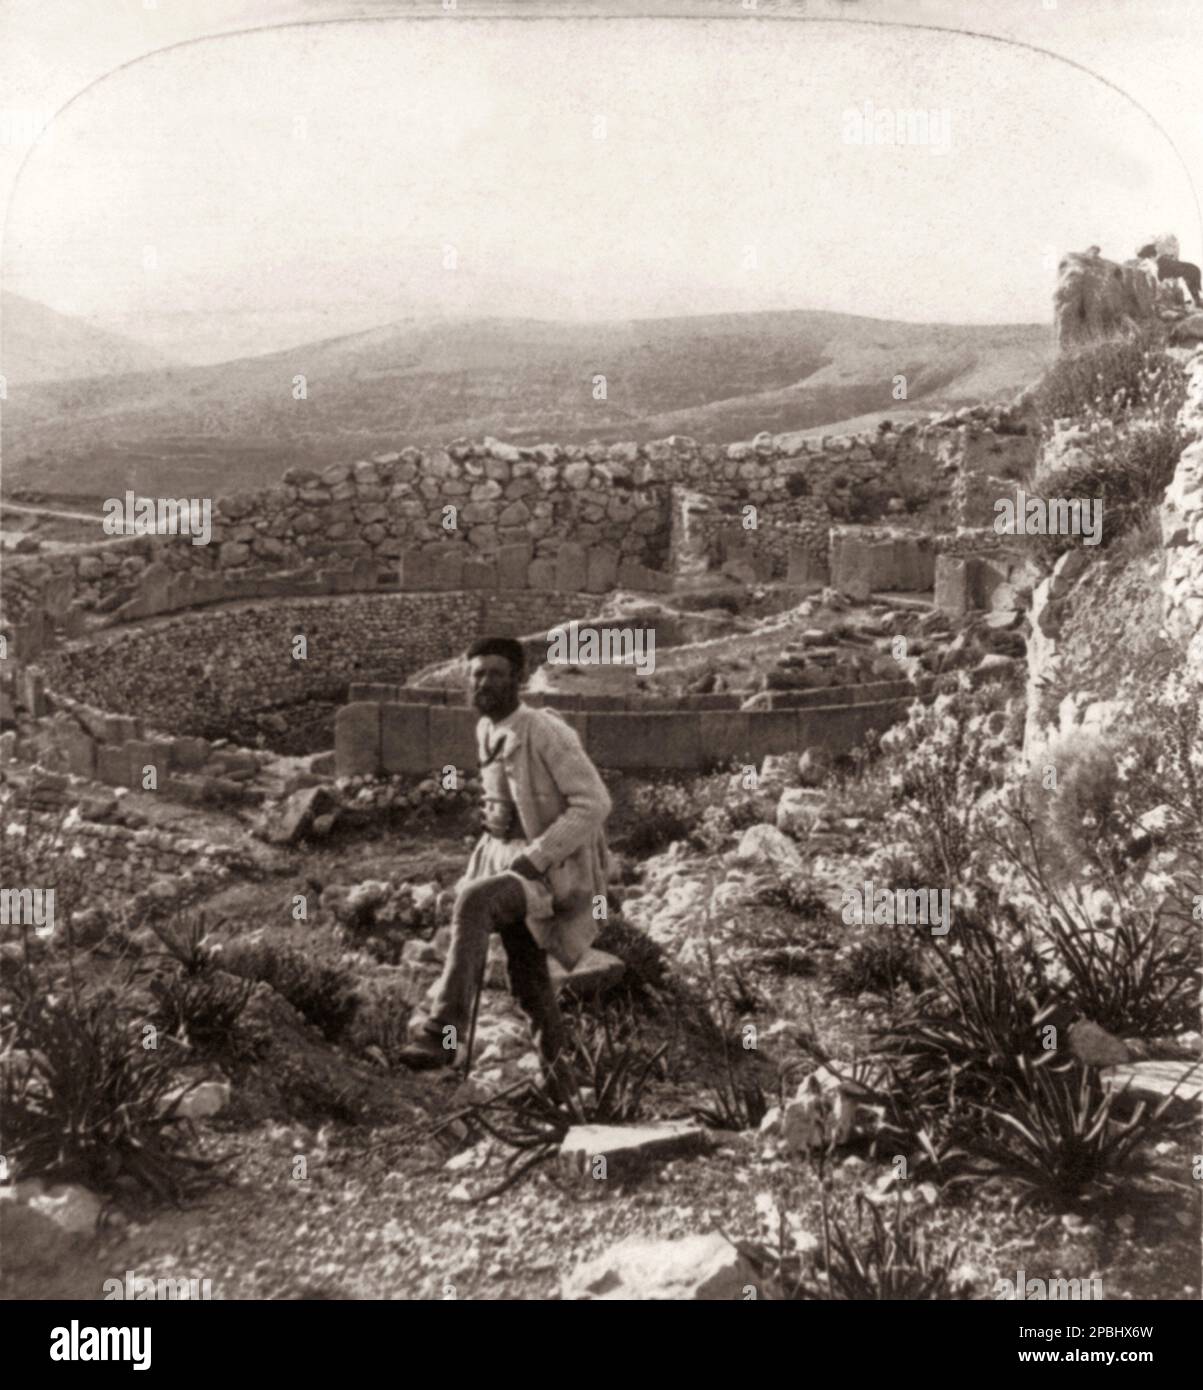 1897 : The place of council, ruins of Homeric Age, Mycenae , Greece . Circular royal tombs .  Stereotype photo by Underwood Co., USA . The german archeologist HEINRICH SCHLIEMANN ( 1822 in Neubukow, Mecklenburg-Schwerin -  1890 in Naples , Italy ) was a German treasure hunter, an advocate of the historical reality of places mentioned in the works of Homer, and an important excavator of Troy and of the Mycenaean sites Mycenae and Tiryns . - FOTO STORICHE - HISTORY - OMERO - TROIA - MICENE - GEOGRAFIA - GEOGRAPHY  - ARCHITETTURA - ARCHITECTURE - ARCHEOLOGIA - ARCHEOLOGY - Grecia - Greece - ART - Stock Photo